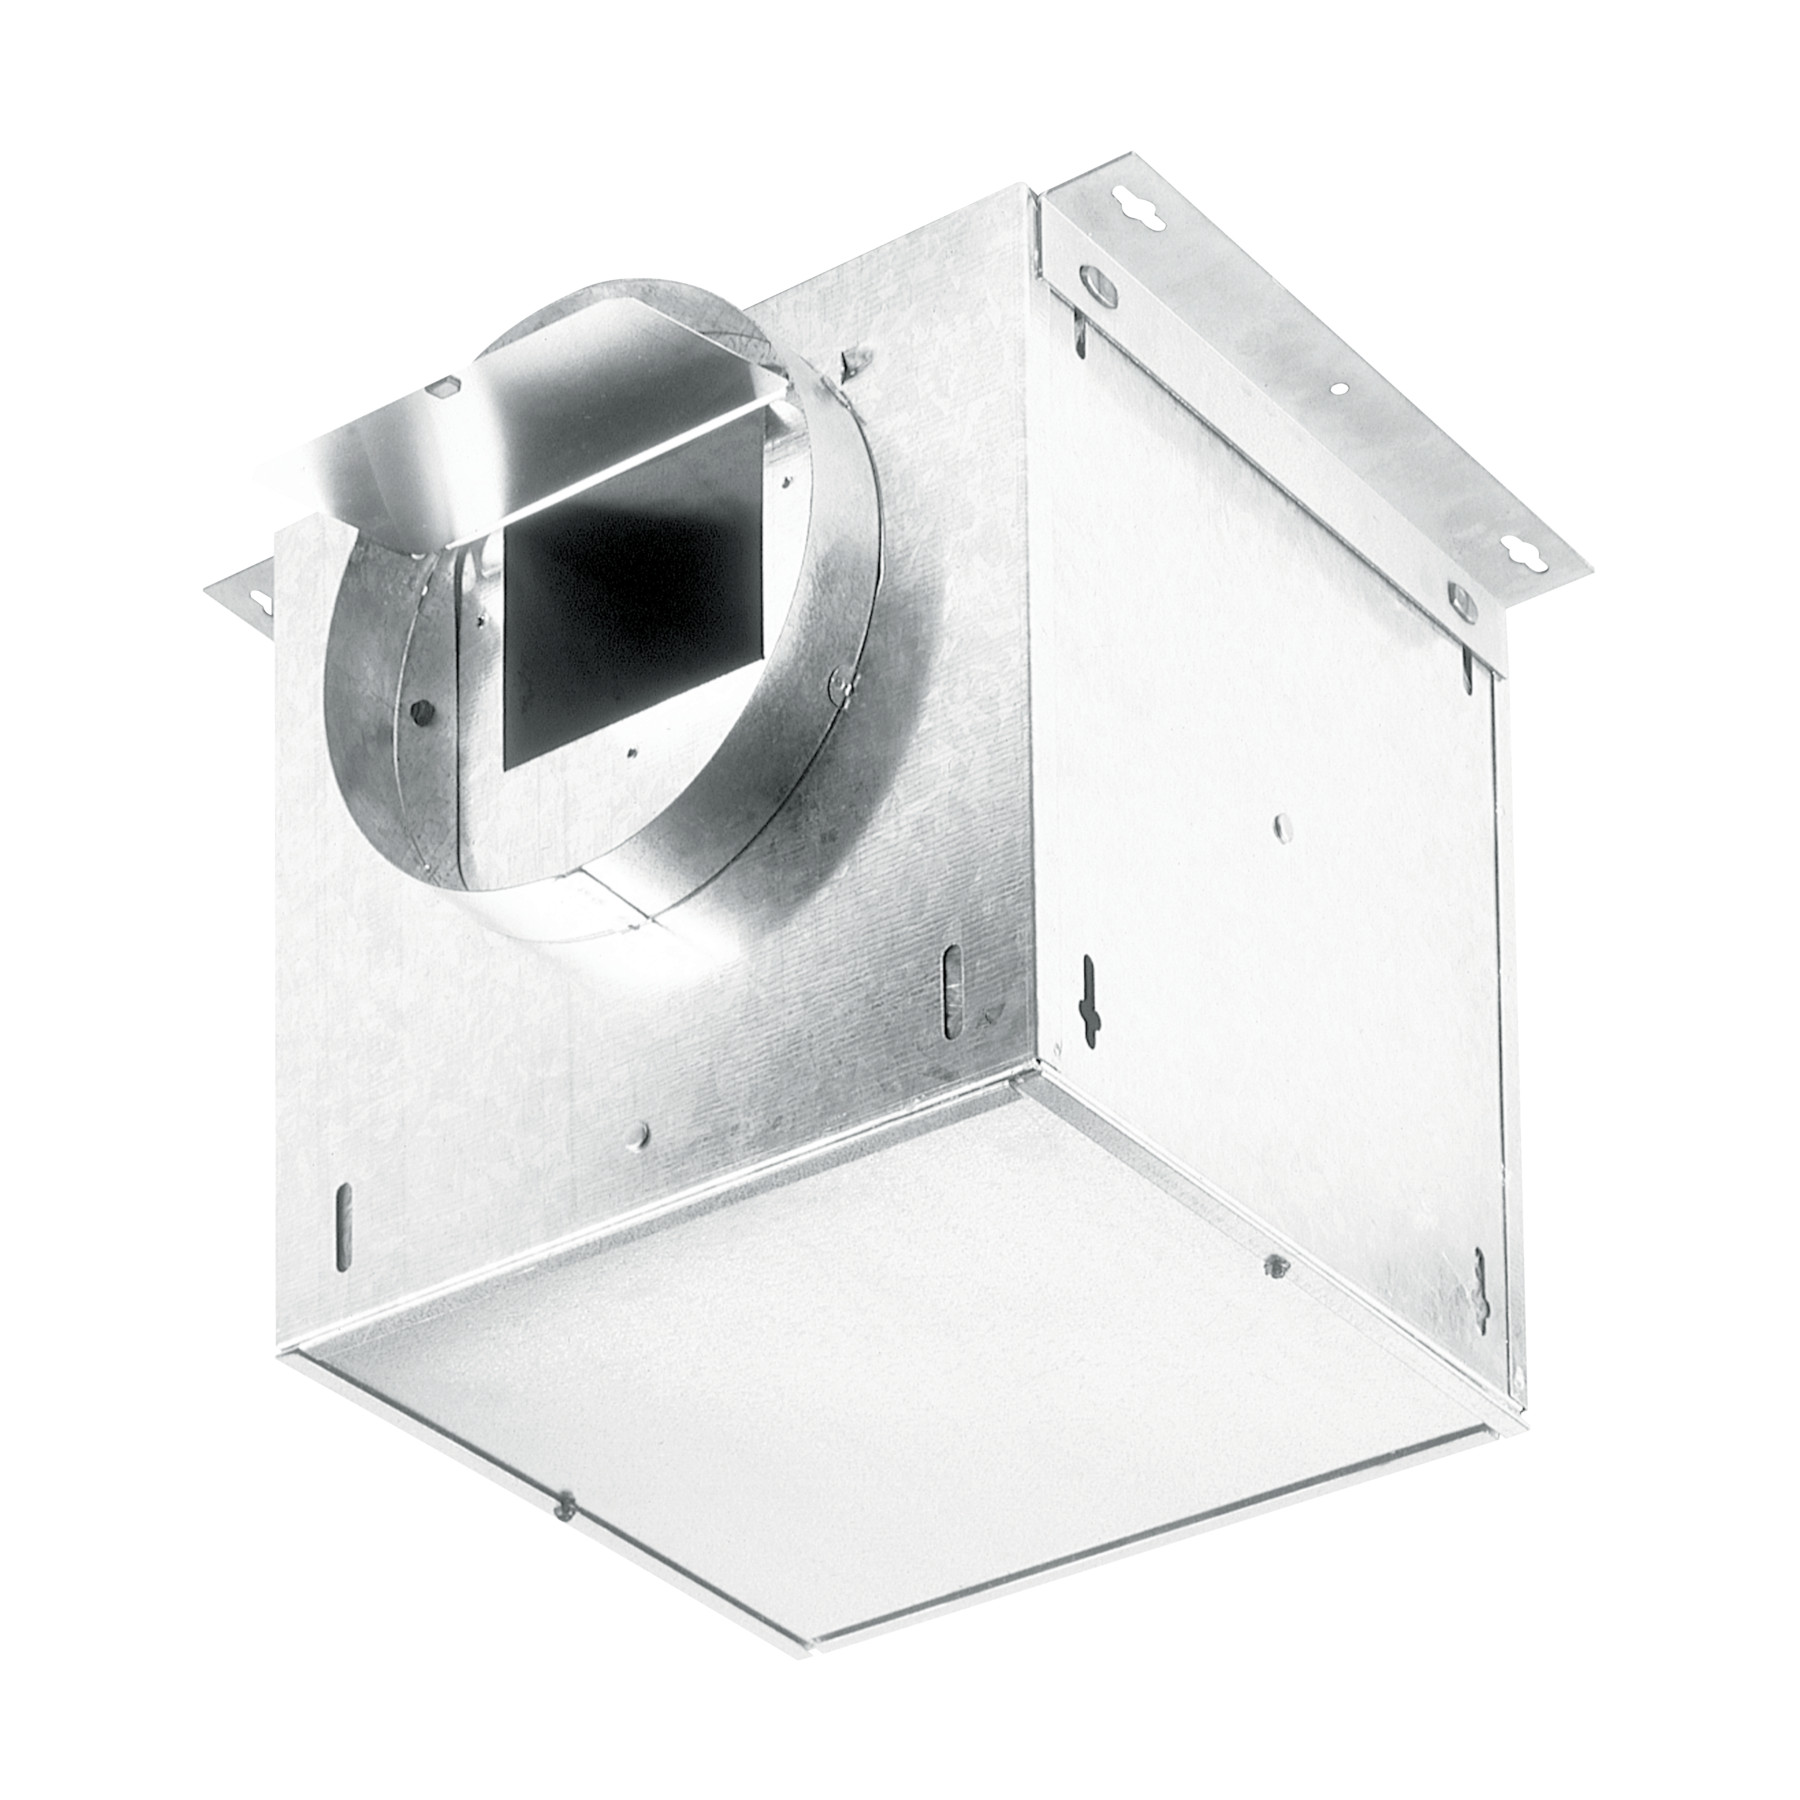 320 Max In-Line Blower CFM for use with Broan® Range Hoods